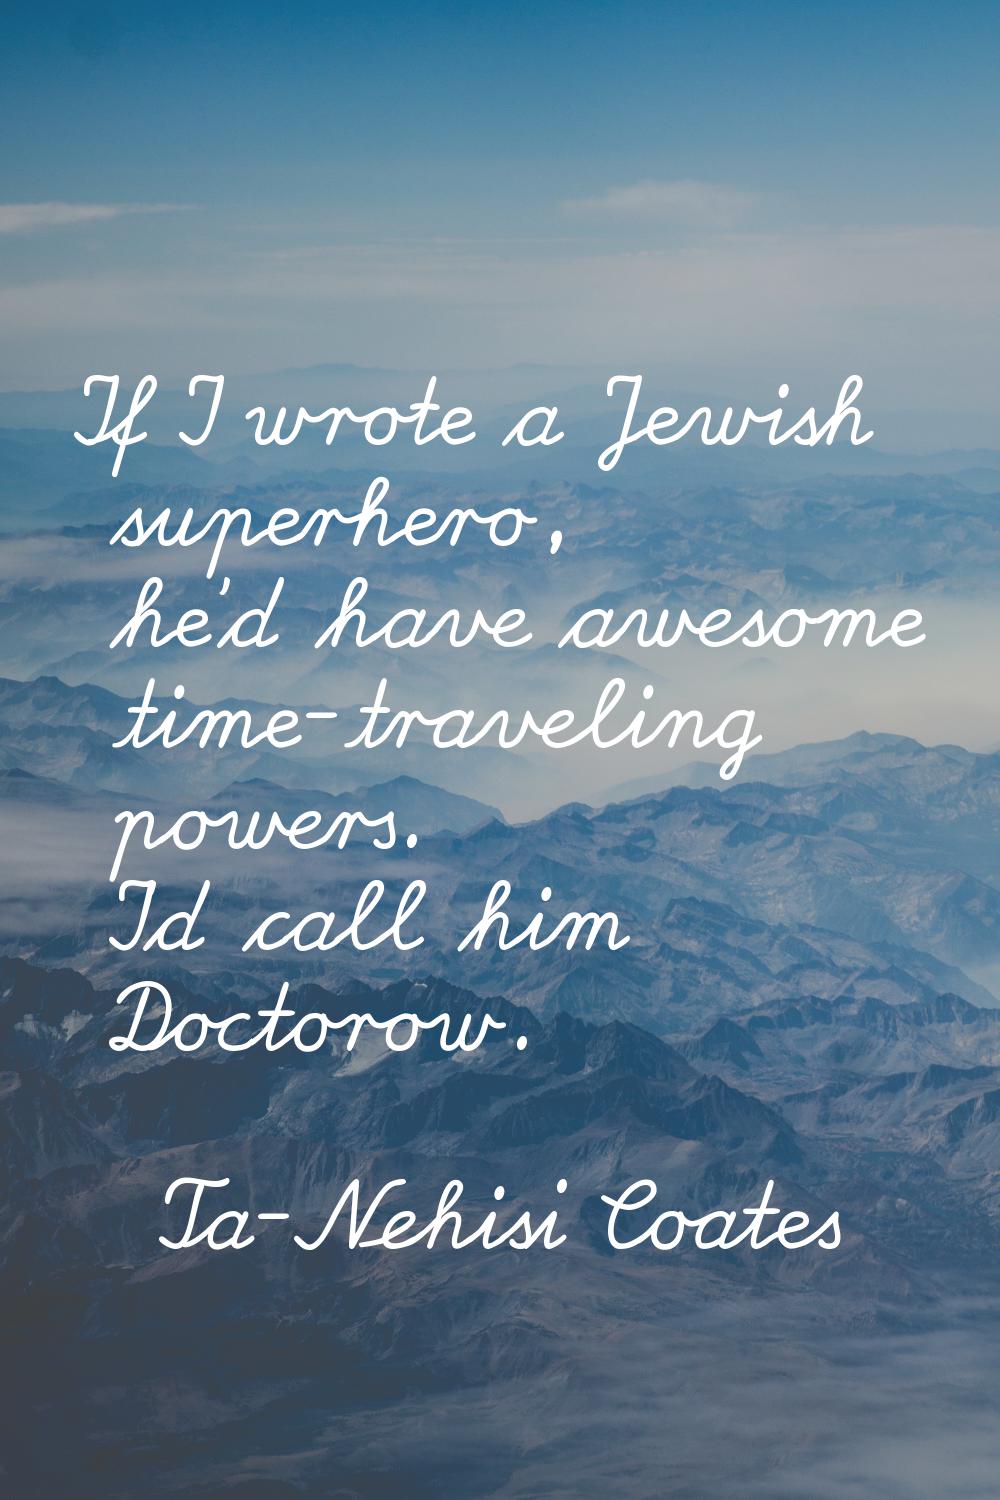 If I wrote a Jewish superhero, he'd have awesome time-traveling powers. I'd call him Doctorow.